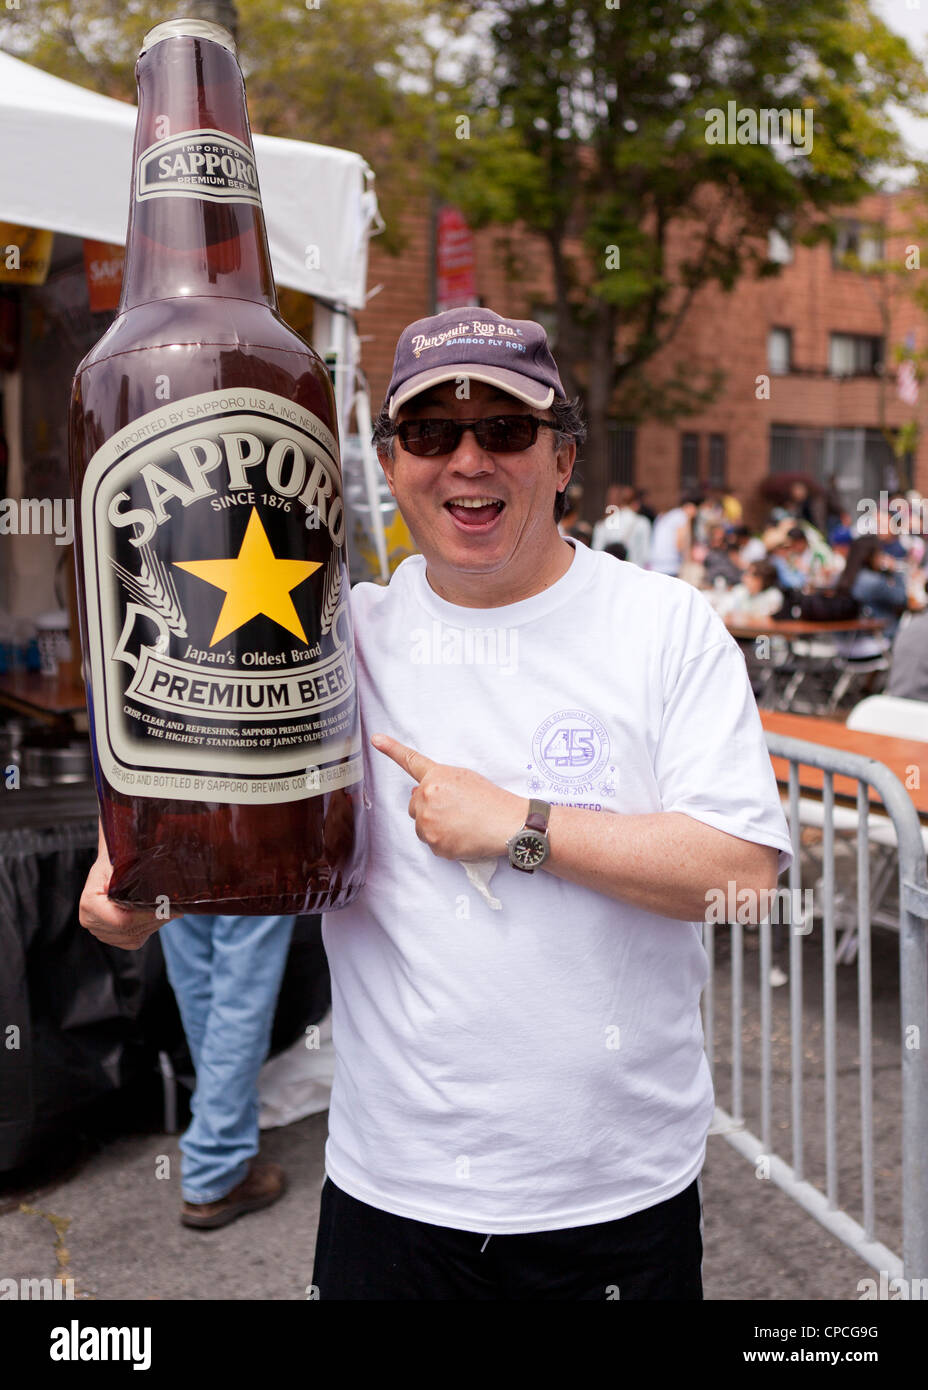 A man holding a large Sapporo inflatable beer bottle - USA Stock Photo